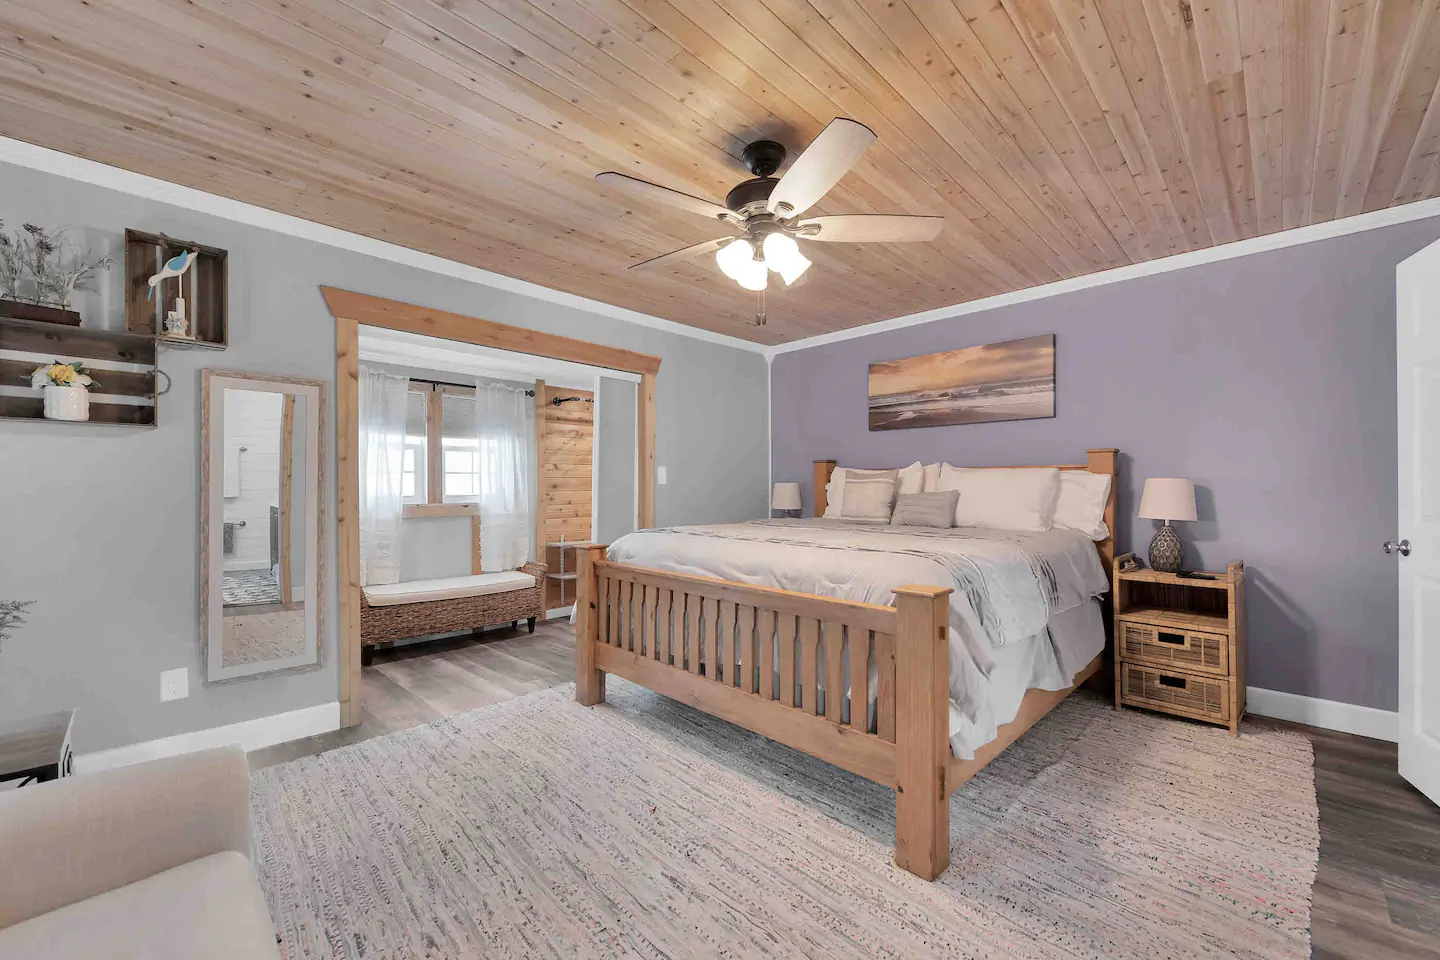 Photo of a bedroom inside an Airbnb in Destin.